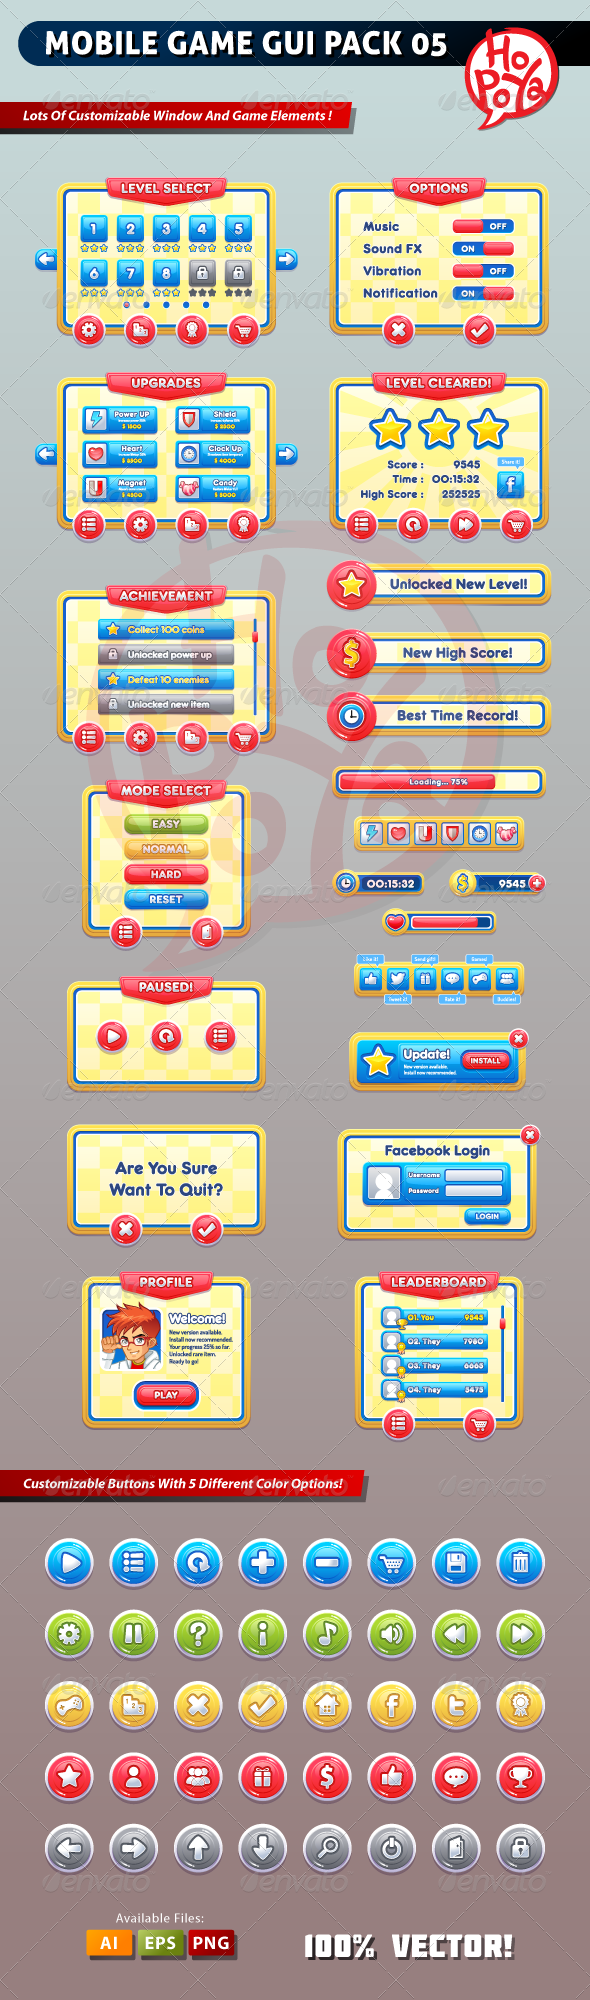 Mobile Game GUI Pack 05